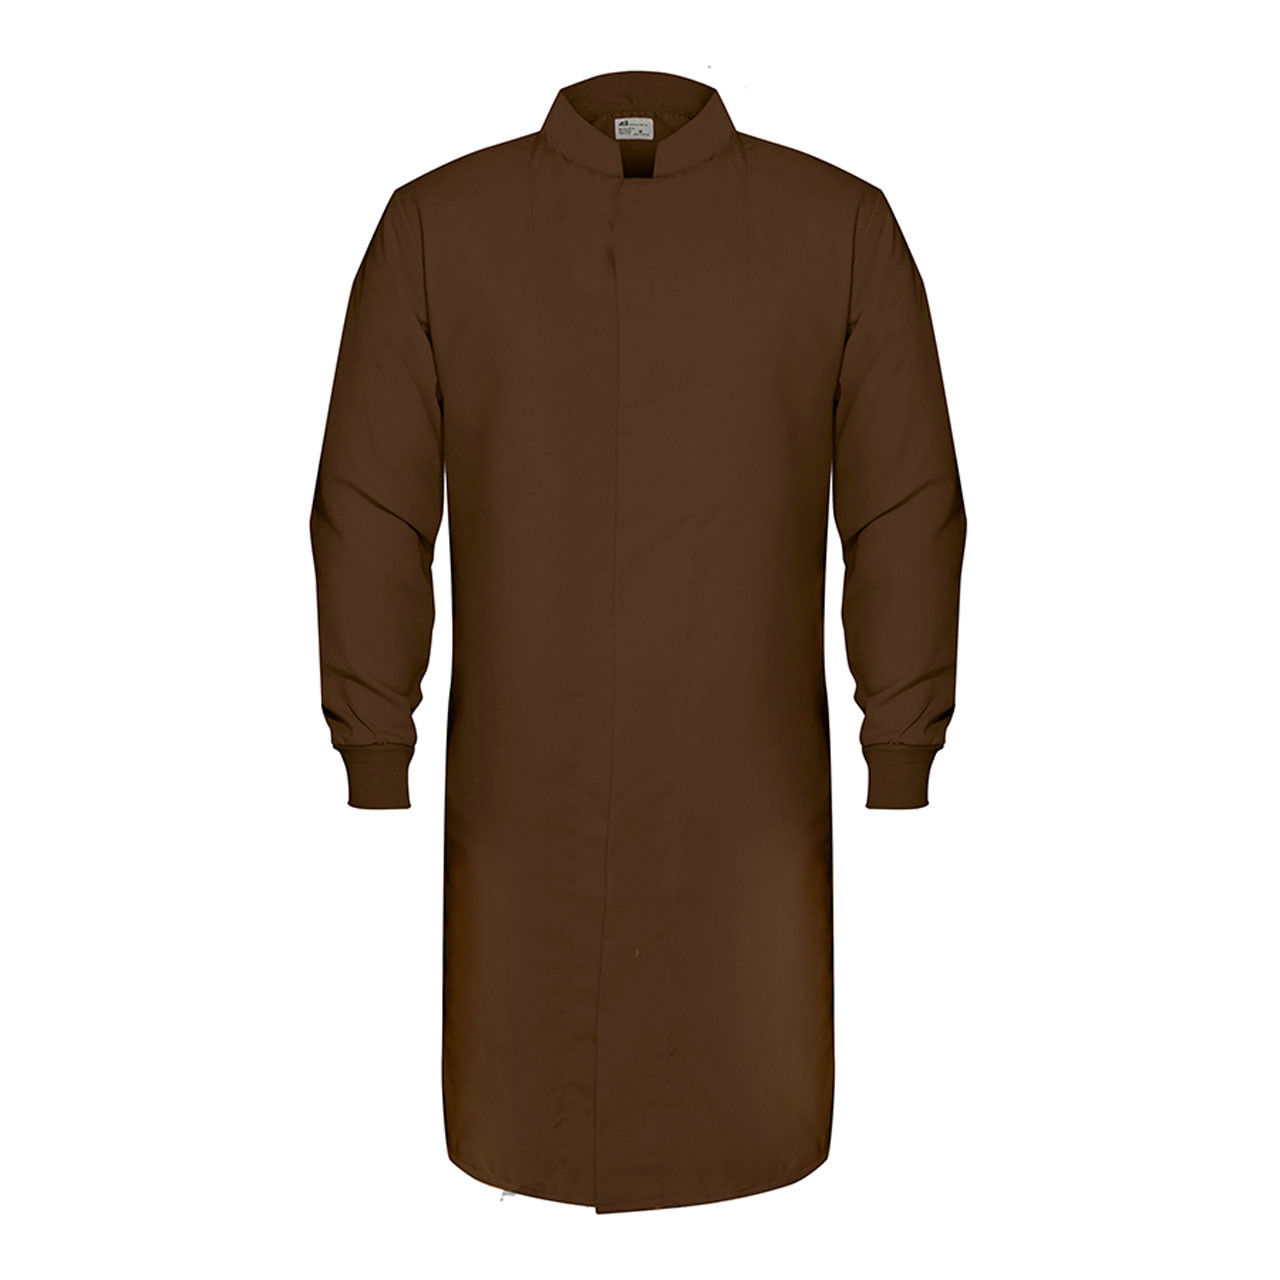 Is the brown lab coat with knit cuffs made from HACCP material?